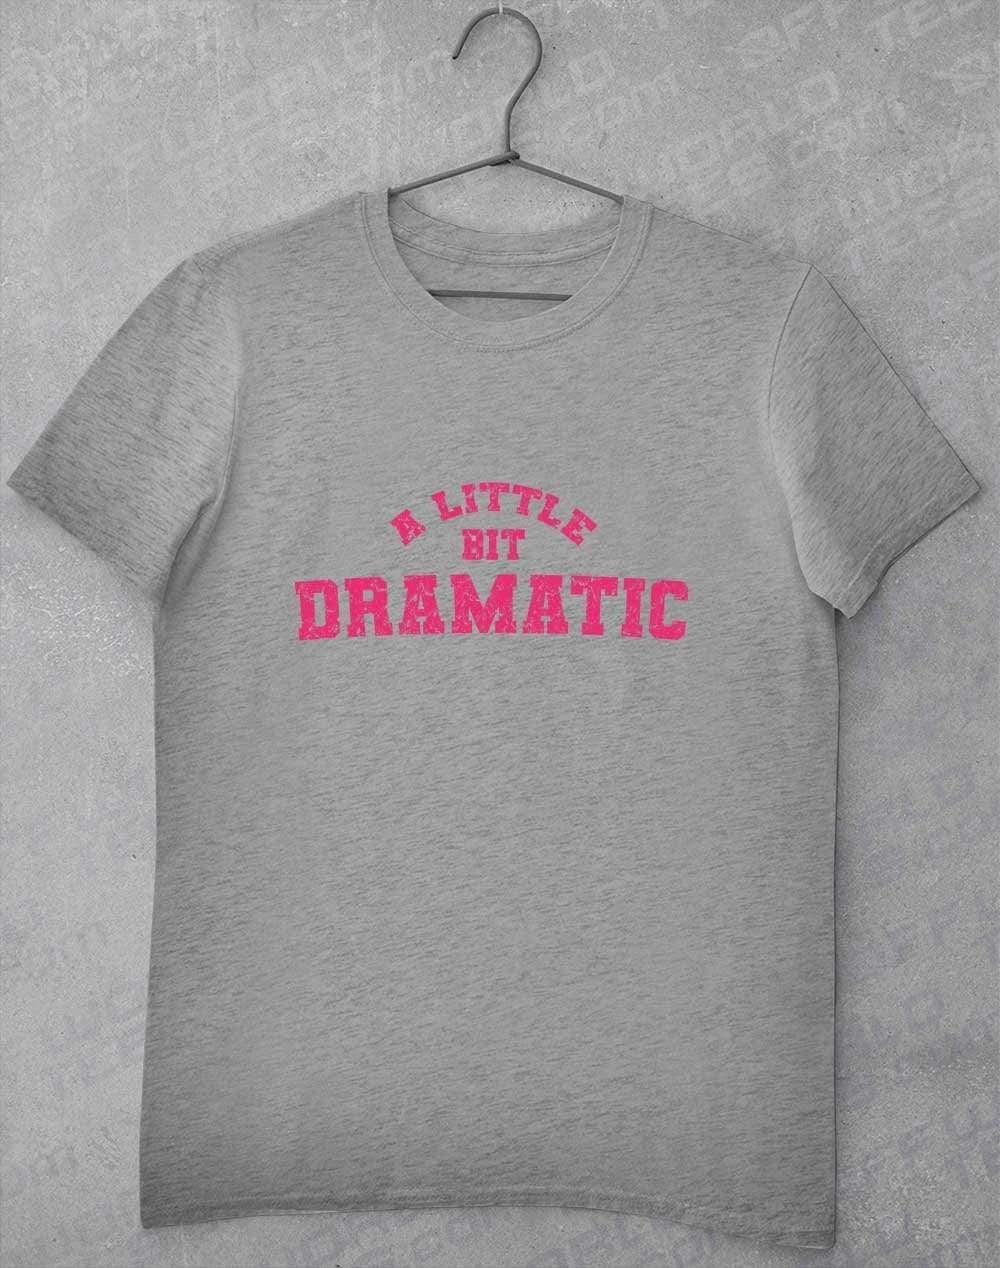 A Little Bit Dramatic Distressed T-Shirt S / Heather Grey  - Off World Tees